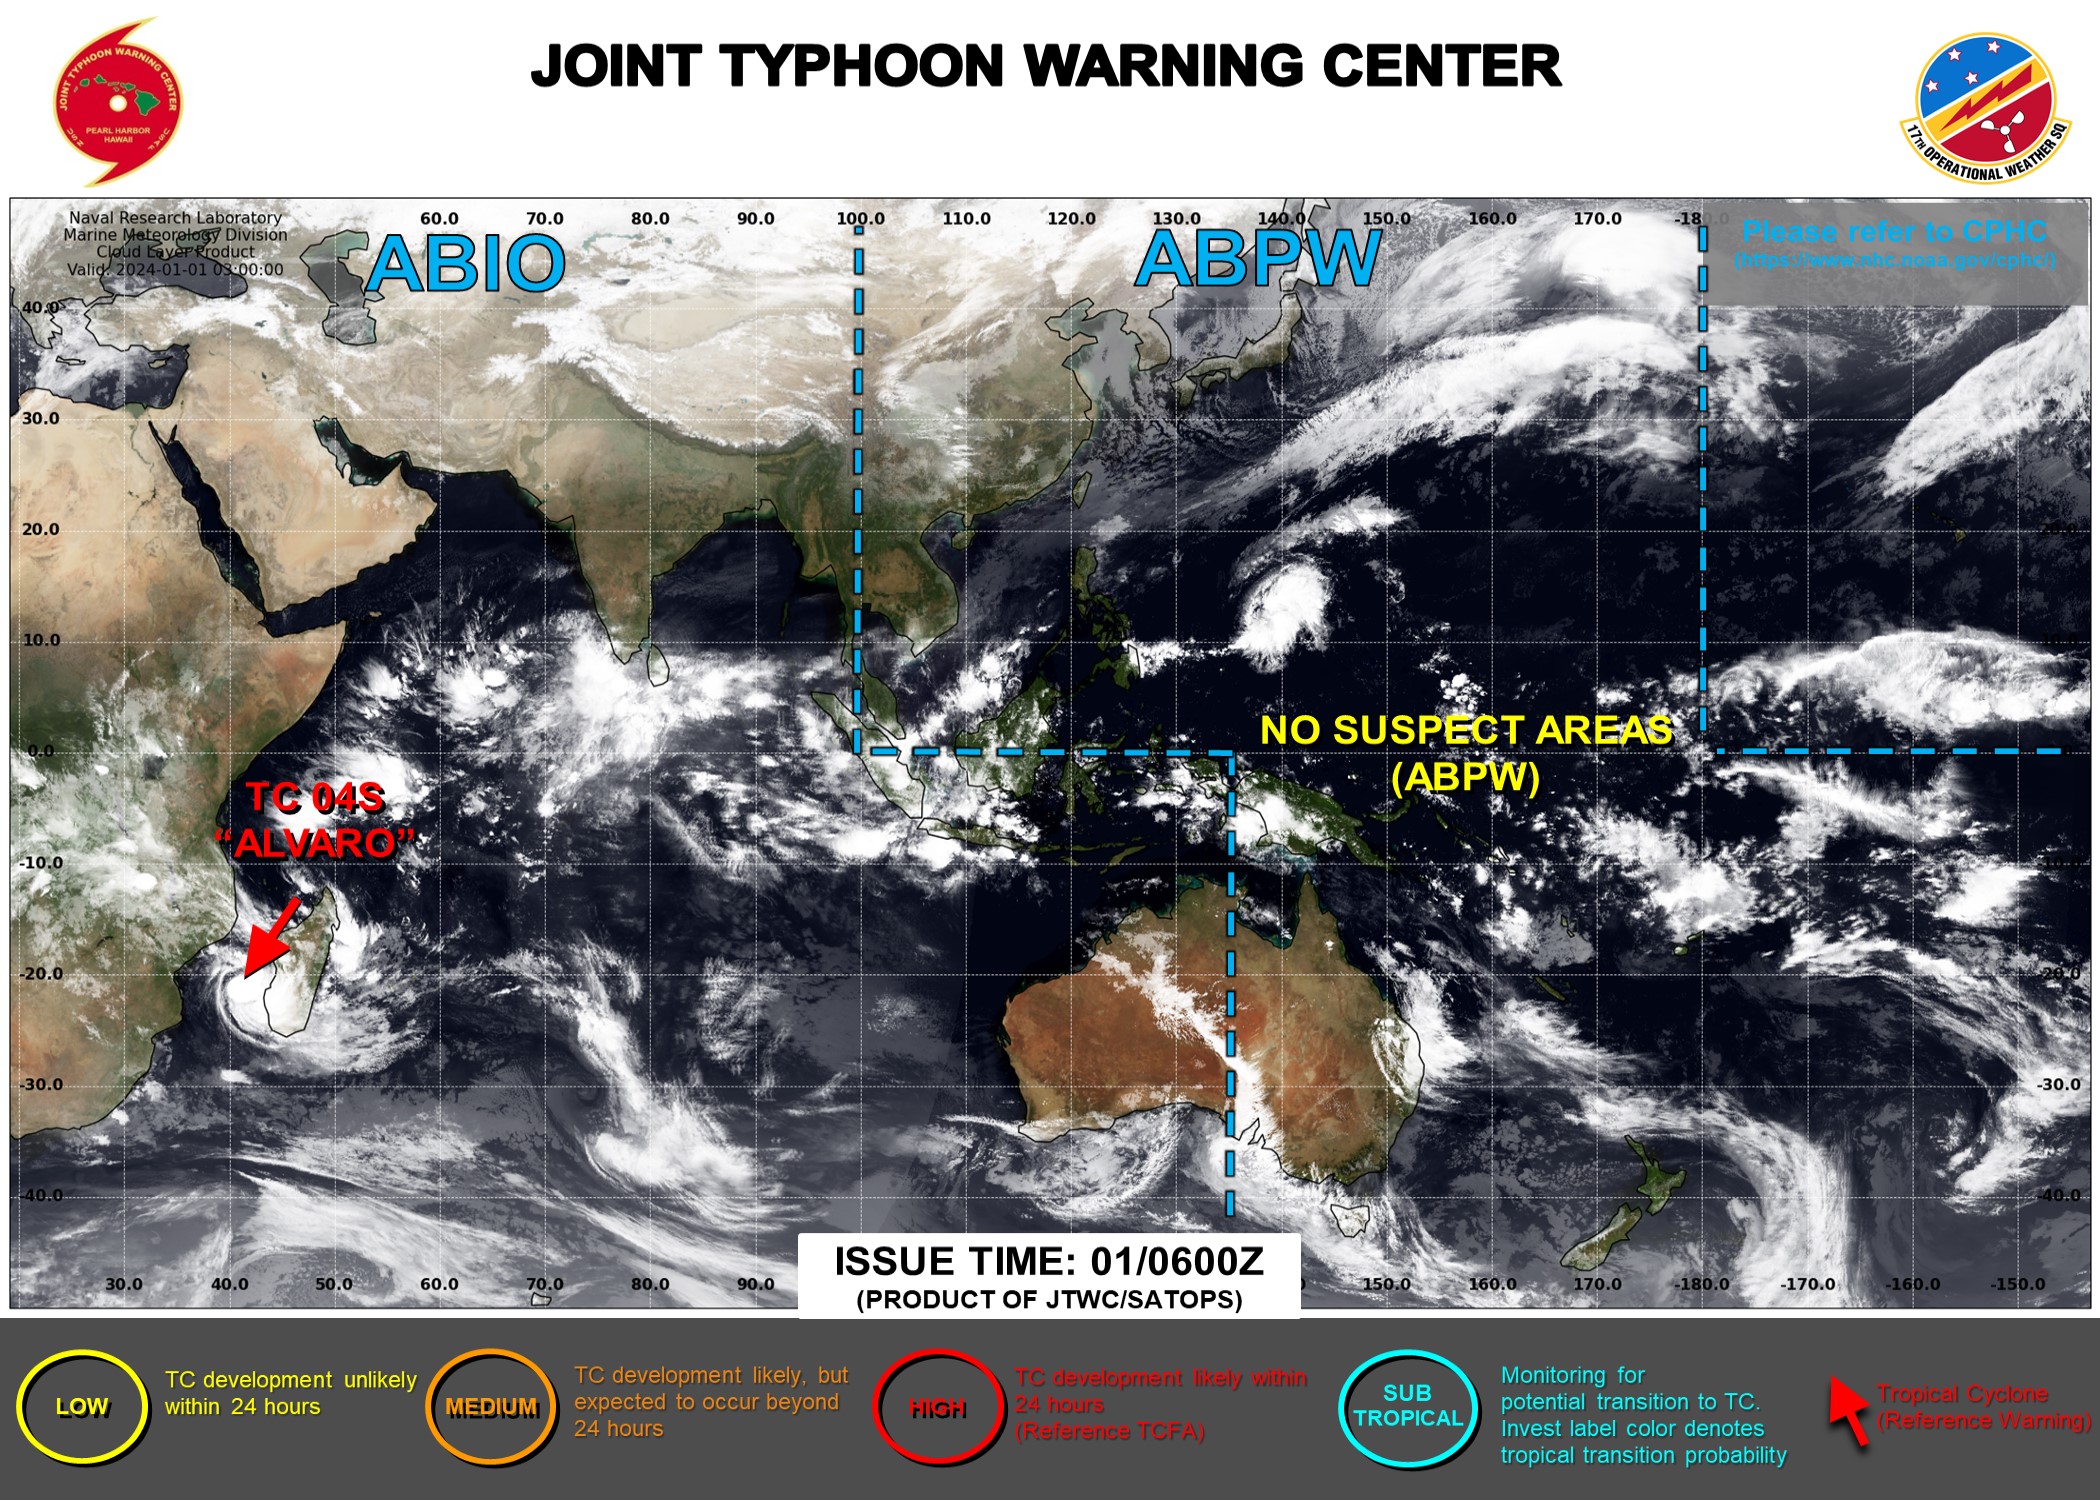 JTWC IS ISSUING 12HOURLY WARNINGS AND 3HOURLY SATELLITE BULLETINS ON TC 04S(ALVARO).